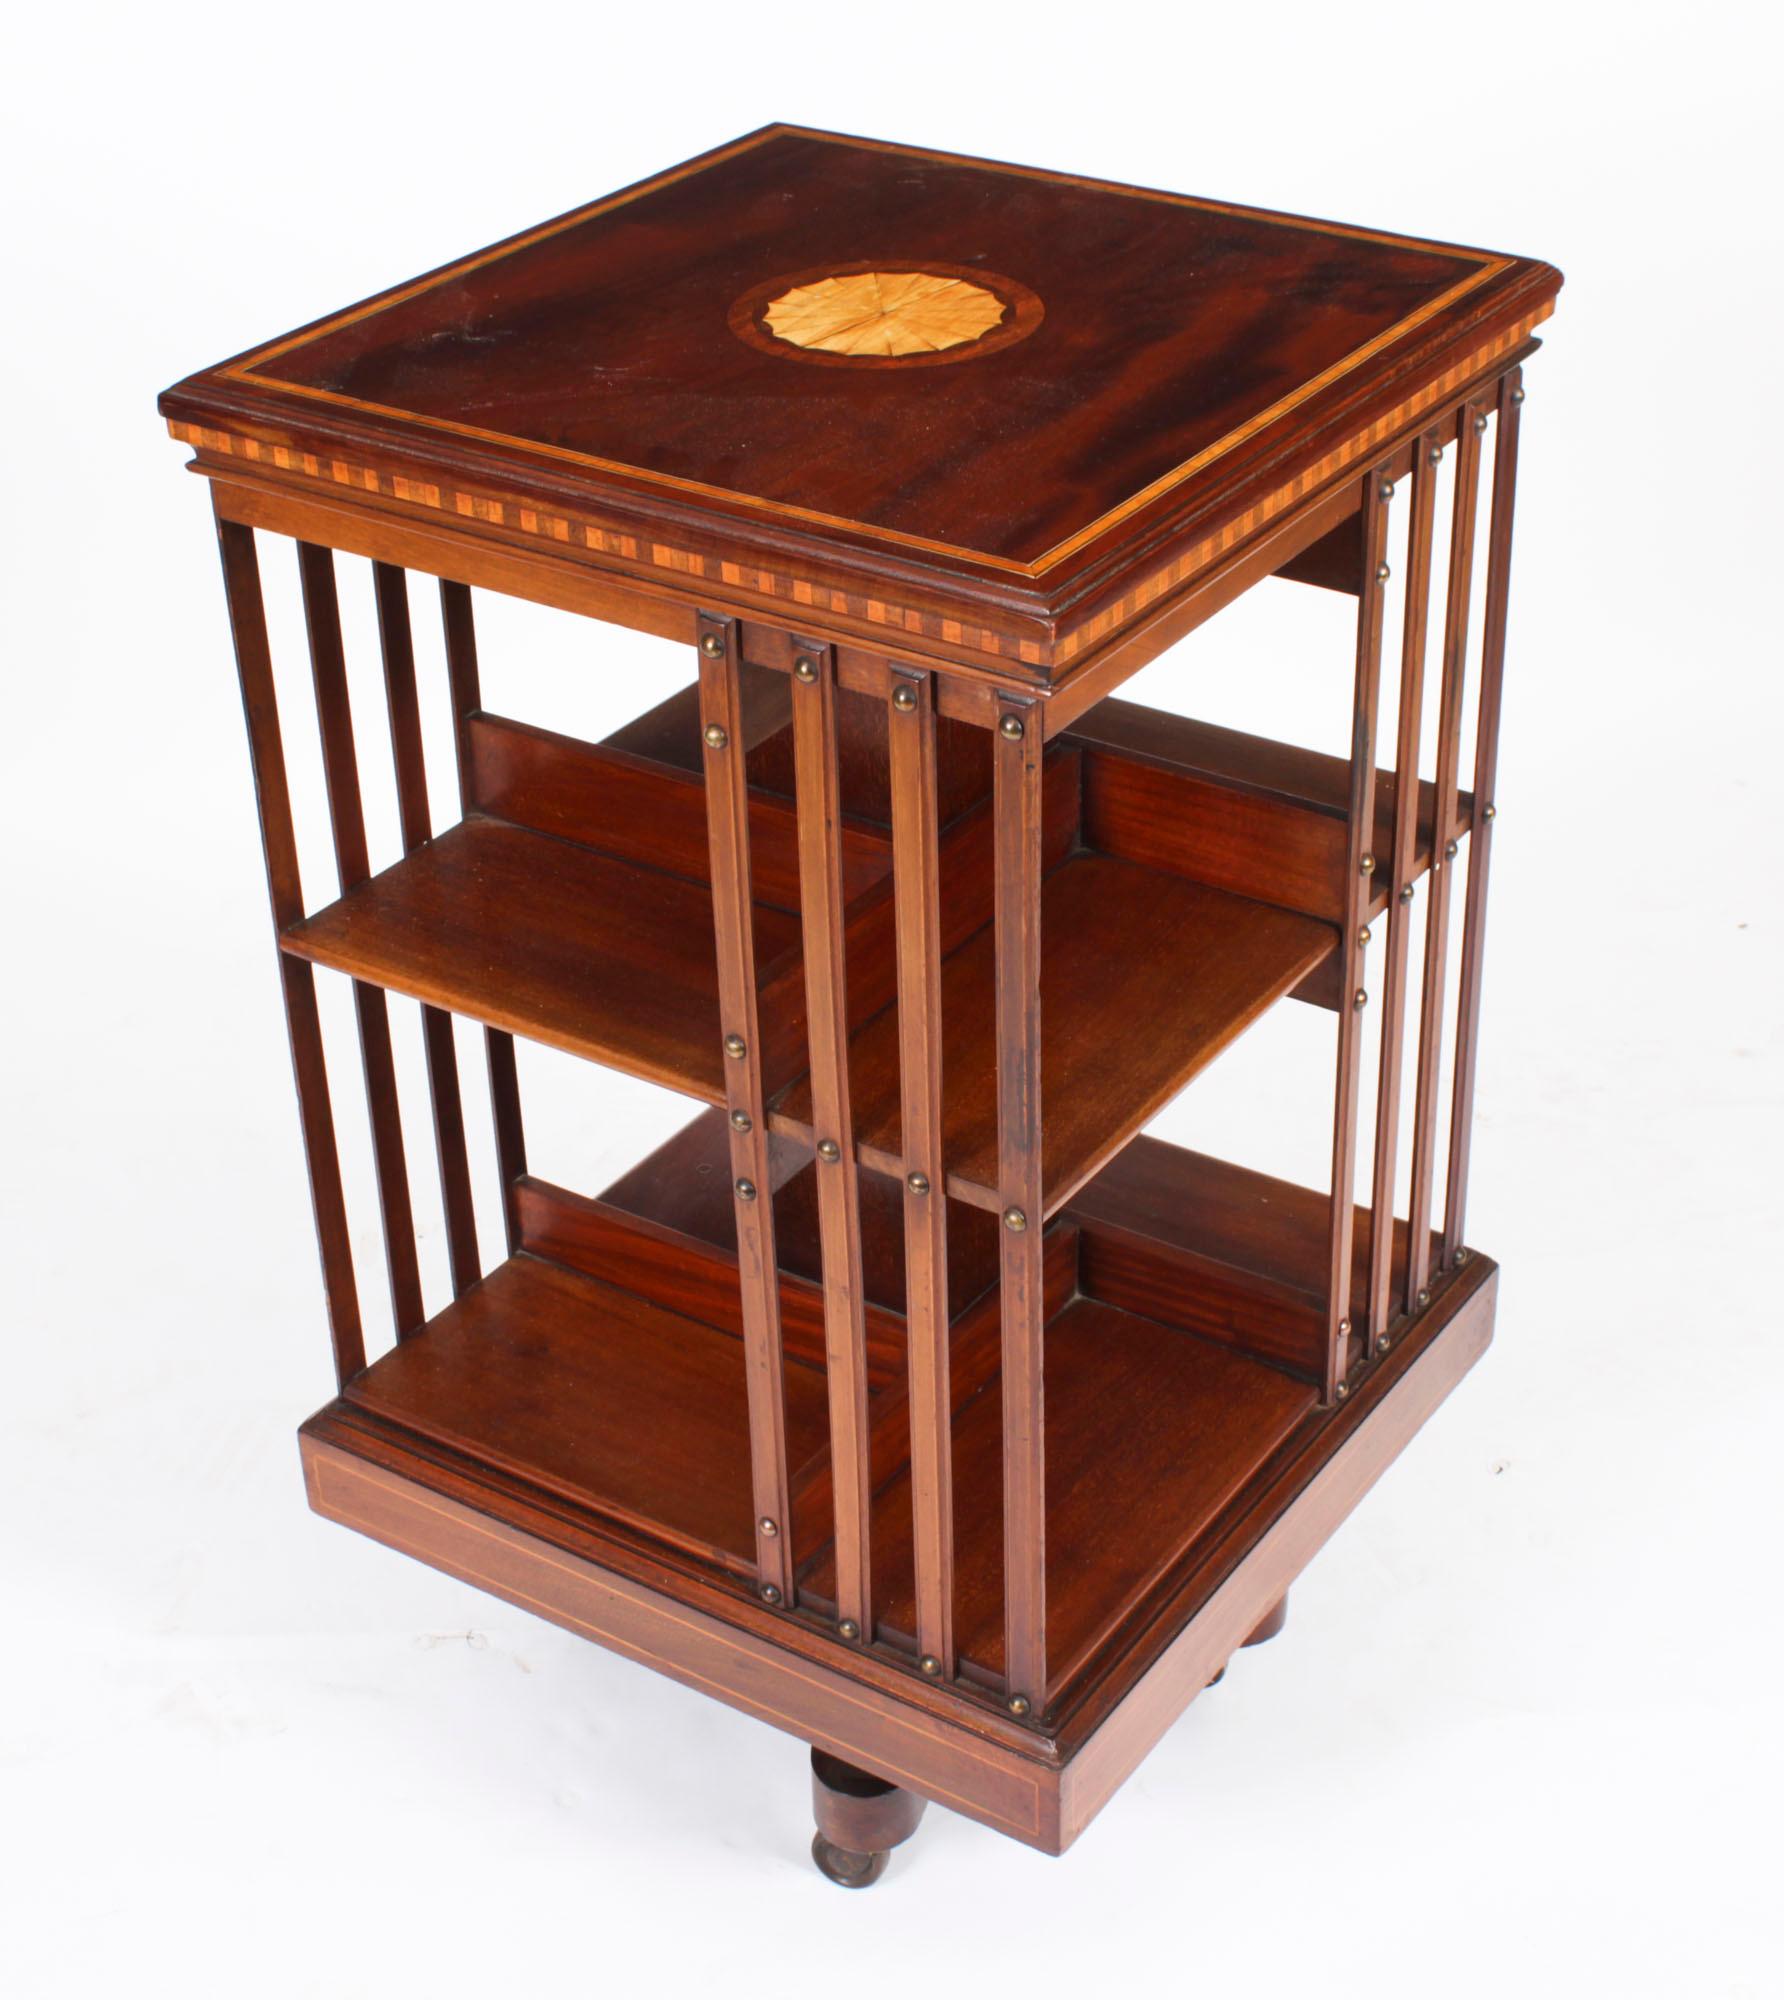 This is an exquisite antique Edwardian marquetry inlaid flame mahogany revolving bookcase, attributed to the renowned Victorian retailer and manufacturer Maple & Co., circa 1900 in date.

It is made of mahogany  and revolves on a solid cast iron